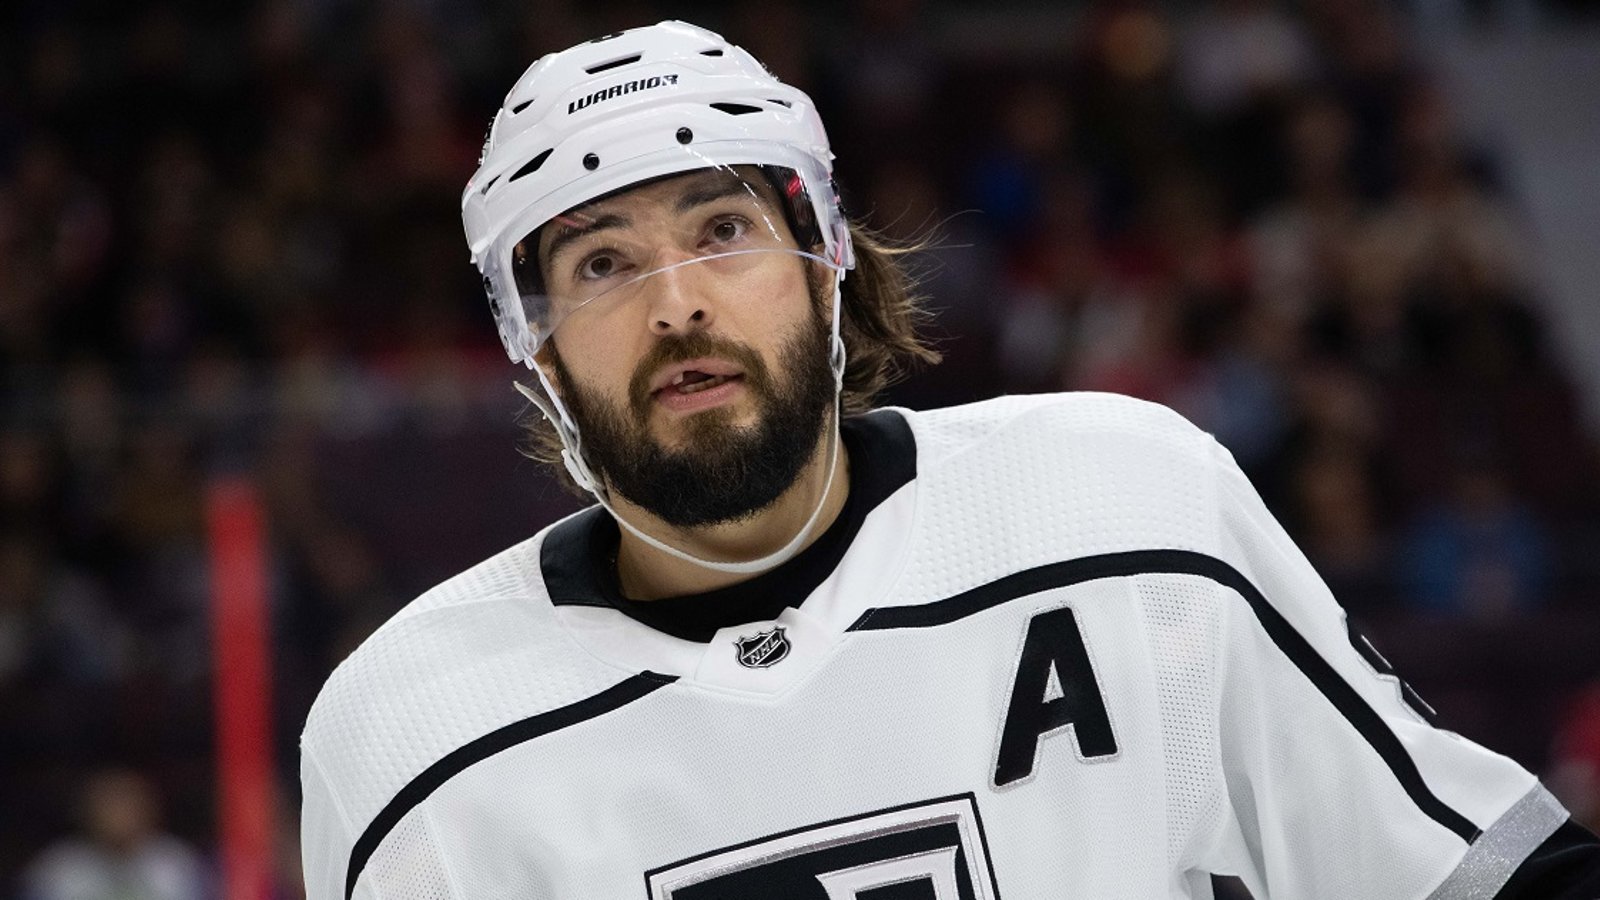 Drew Doughty makes a surprise pick for the Battle of Alberta.